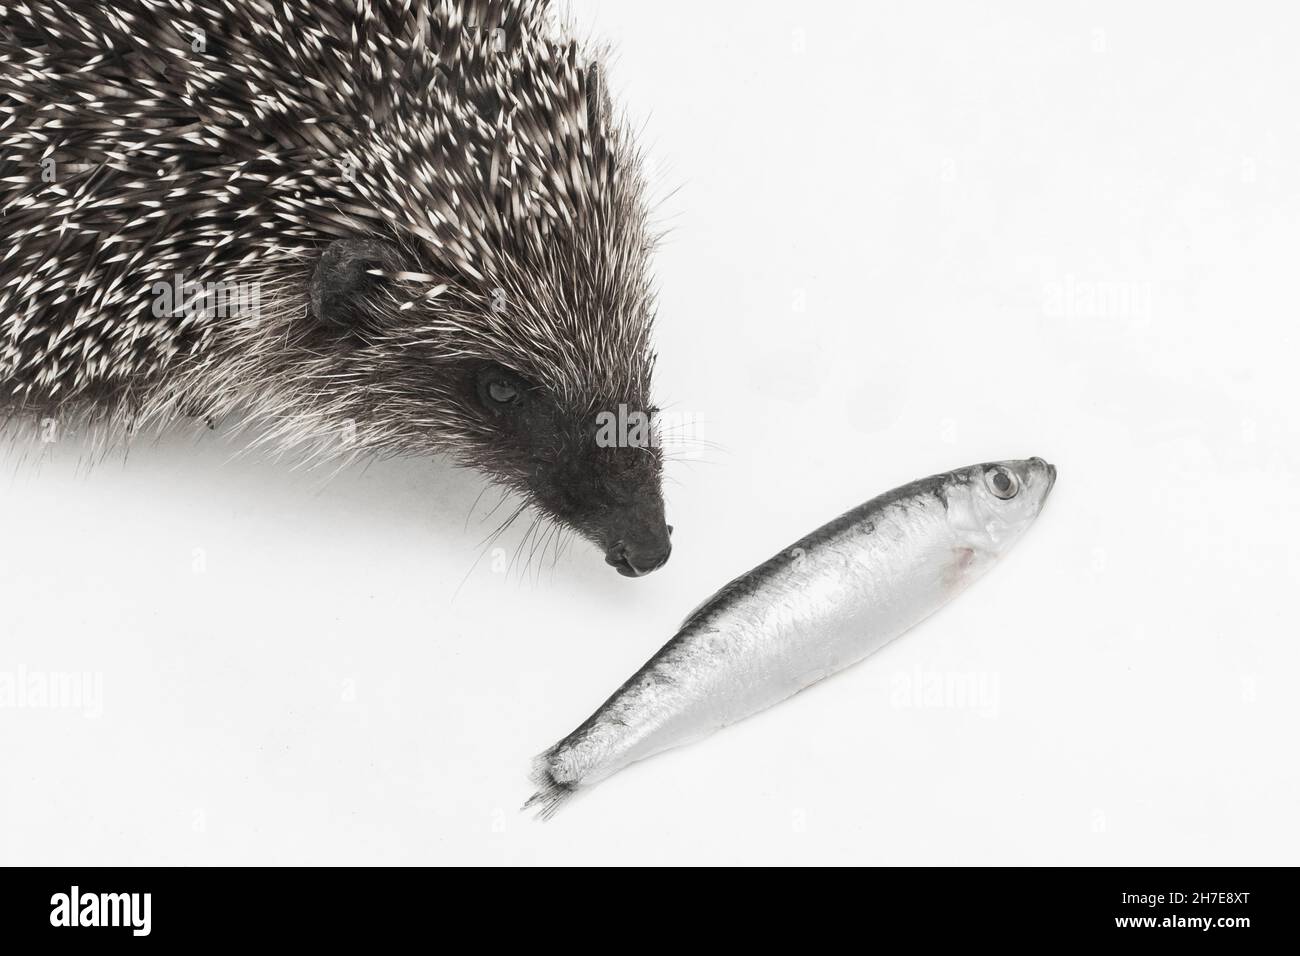 Hedgehog prickly animal of wild nature mammal eats fish on a white background. Stock Photo